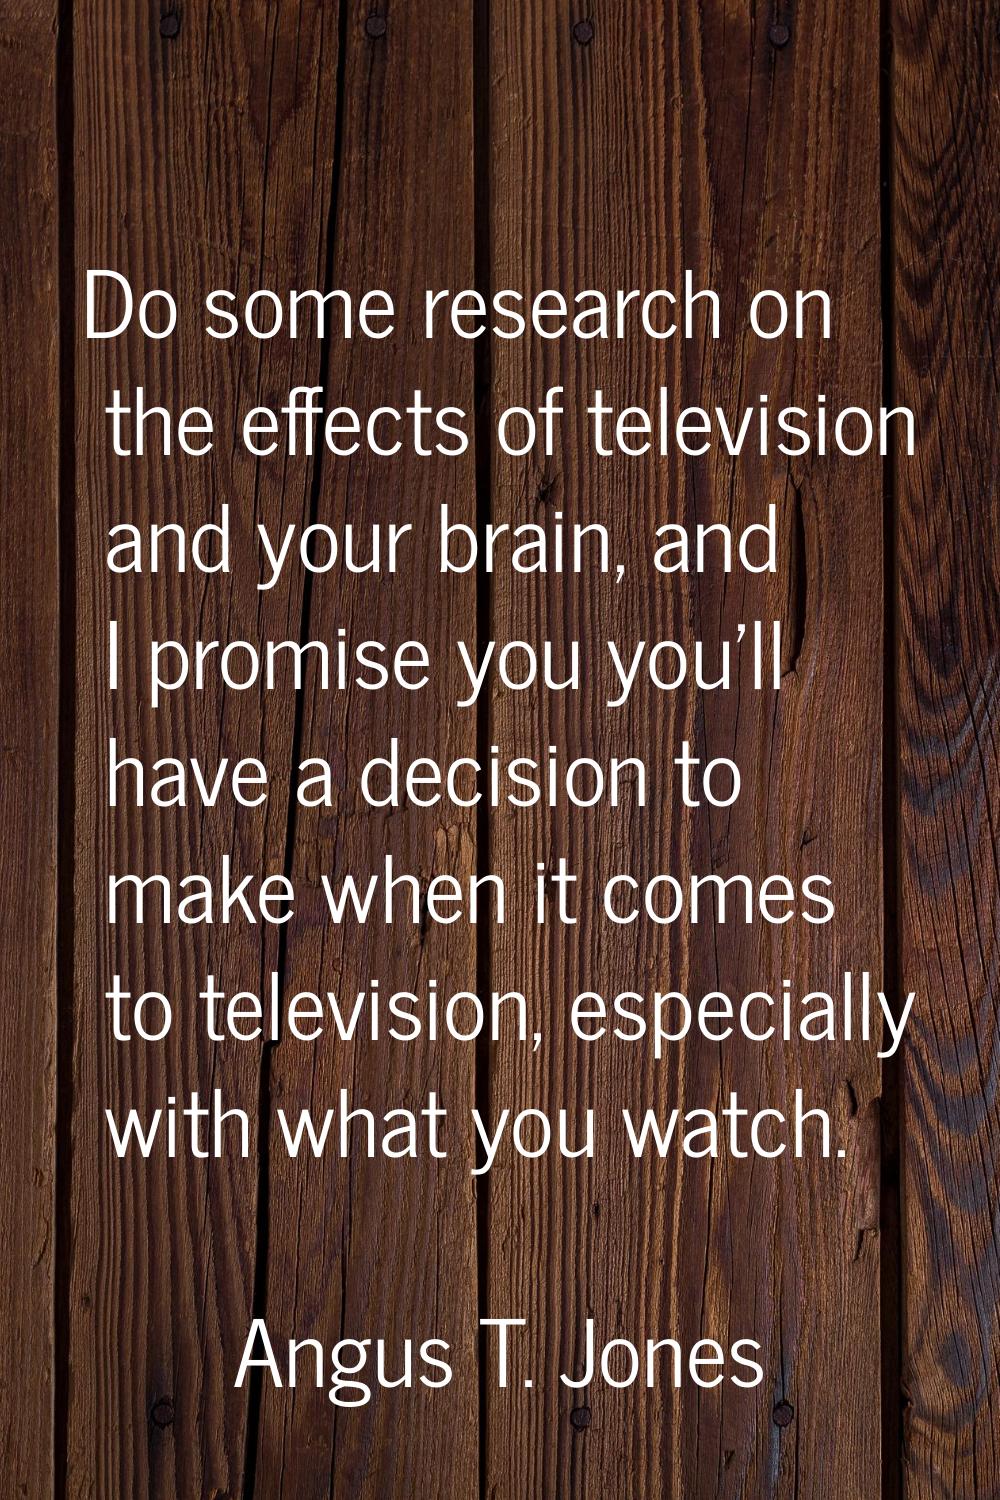 Do some research on the effects of television and your brain, and I promise you you'll have a decis